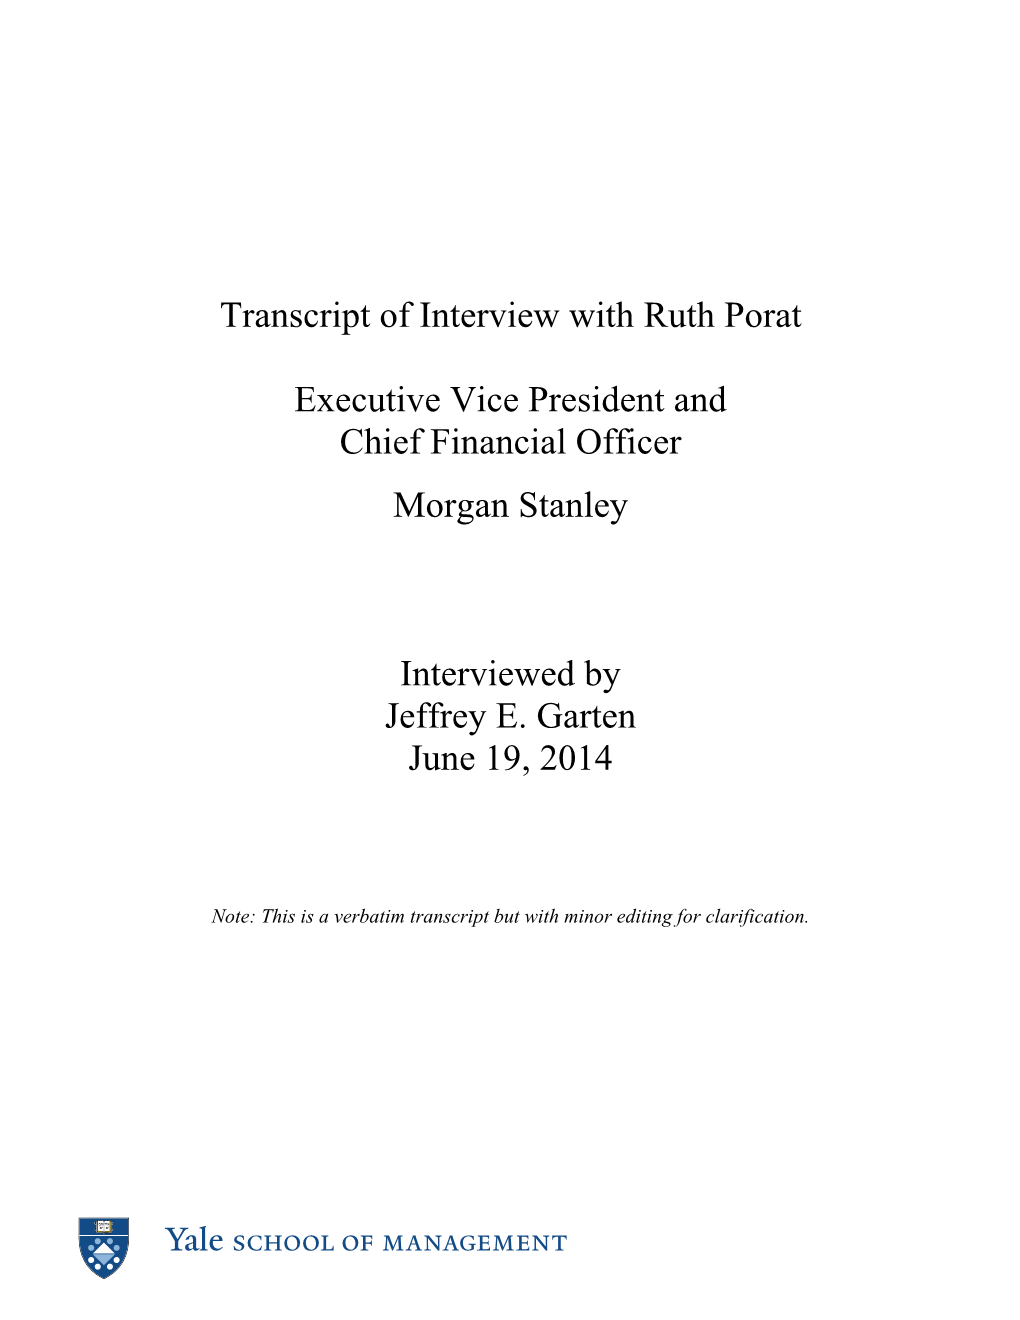 Transcript of Interview with Ruth Porat Executive Vice President and Chief